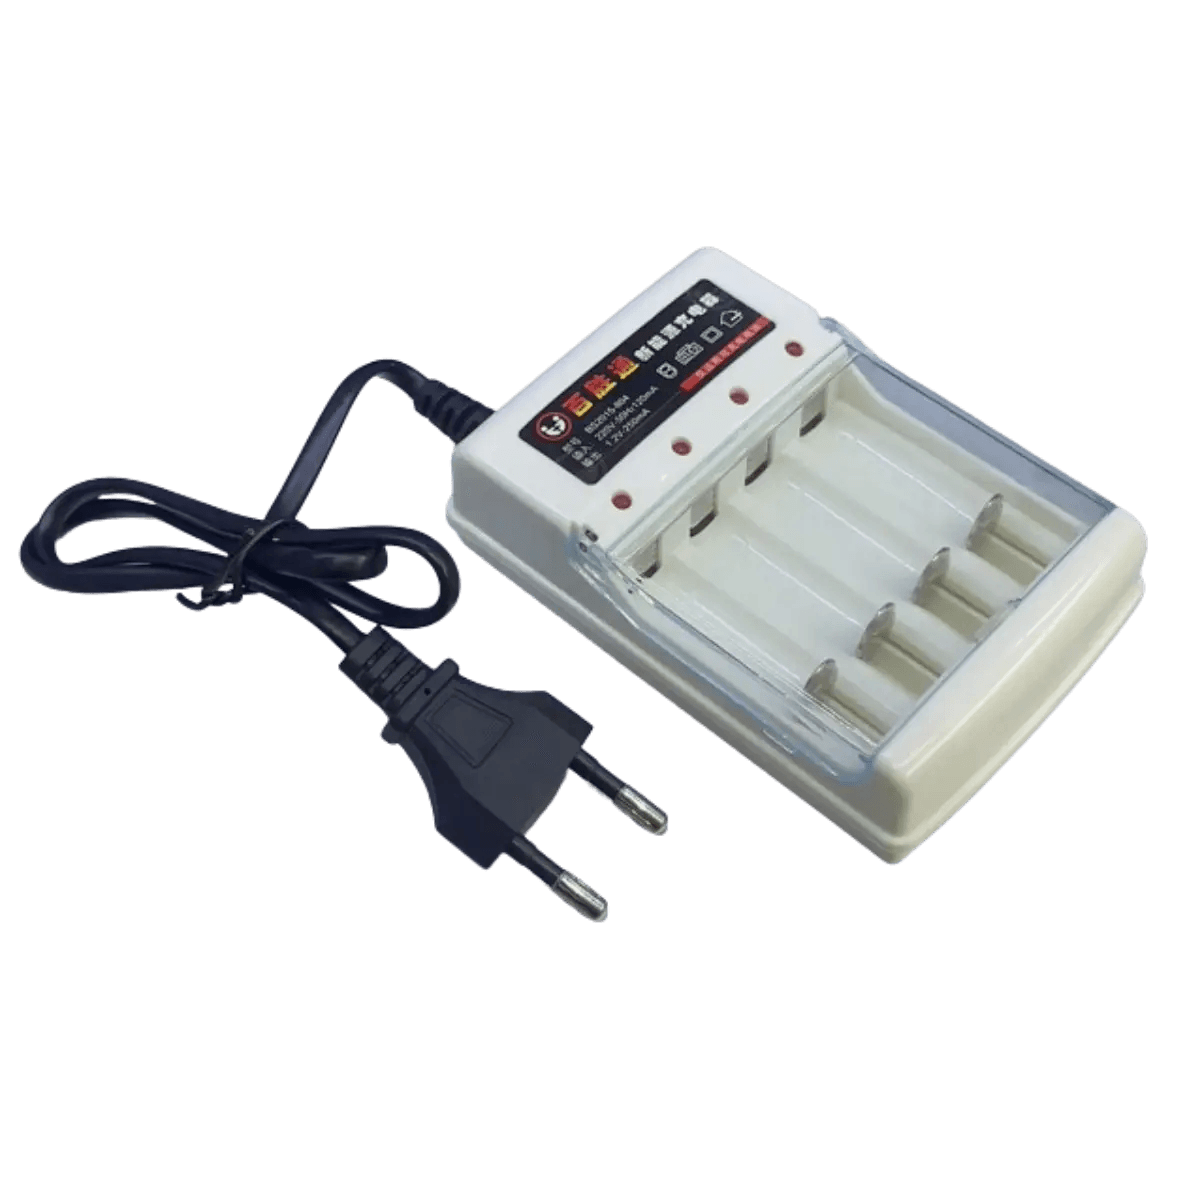 Chargeur pour batteries Ni-Mh et NiCd 1.2V AA et AAA